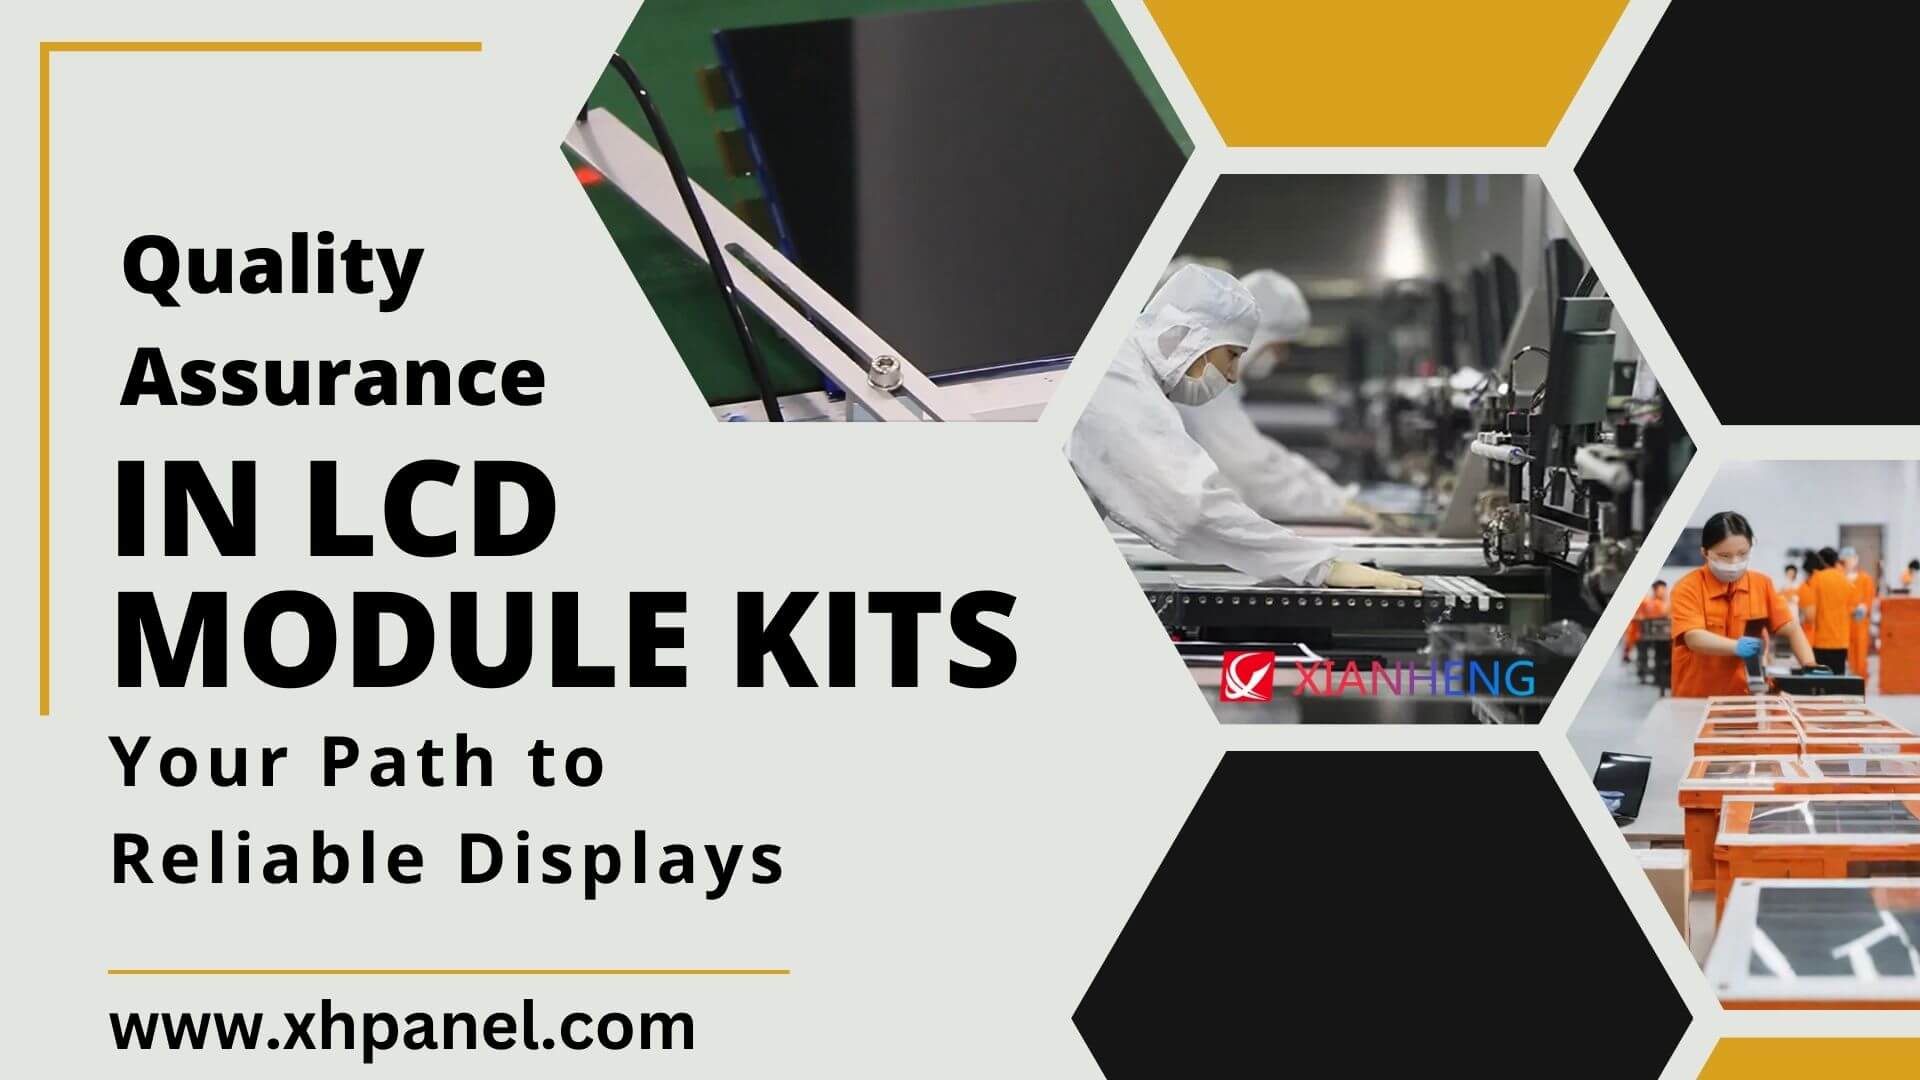 Quality Assurance in LCD Module Kits Your Path to Reliable Displays